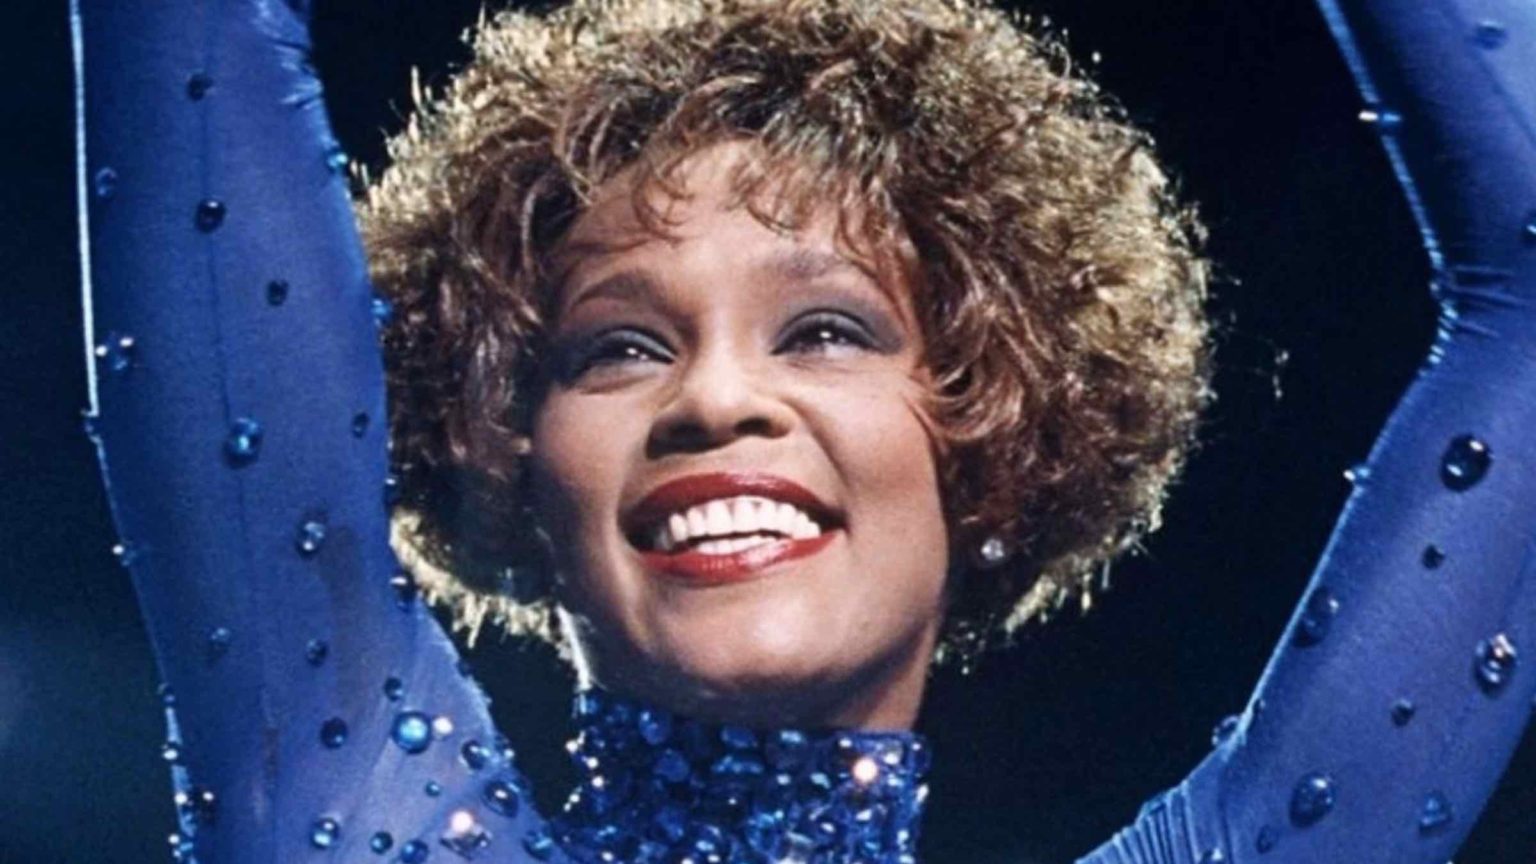 The story of Whitney Houston’s sudden death seems like an open and shut case. Or is it? Here's everything we know about the death of Whitney Houston.